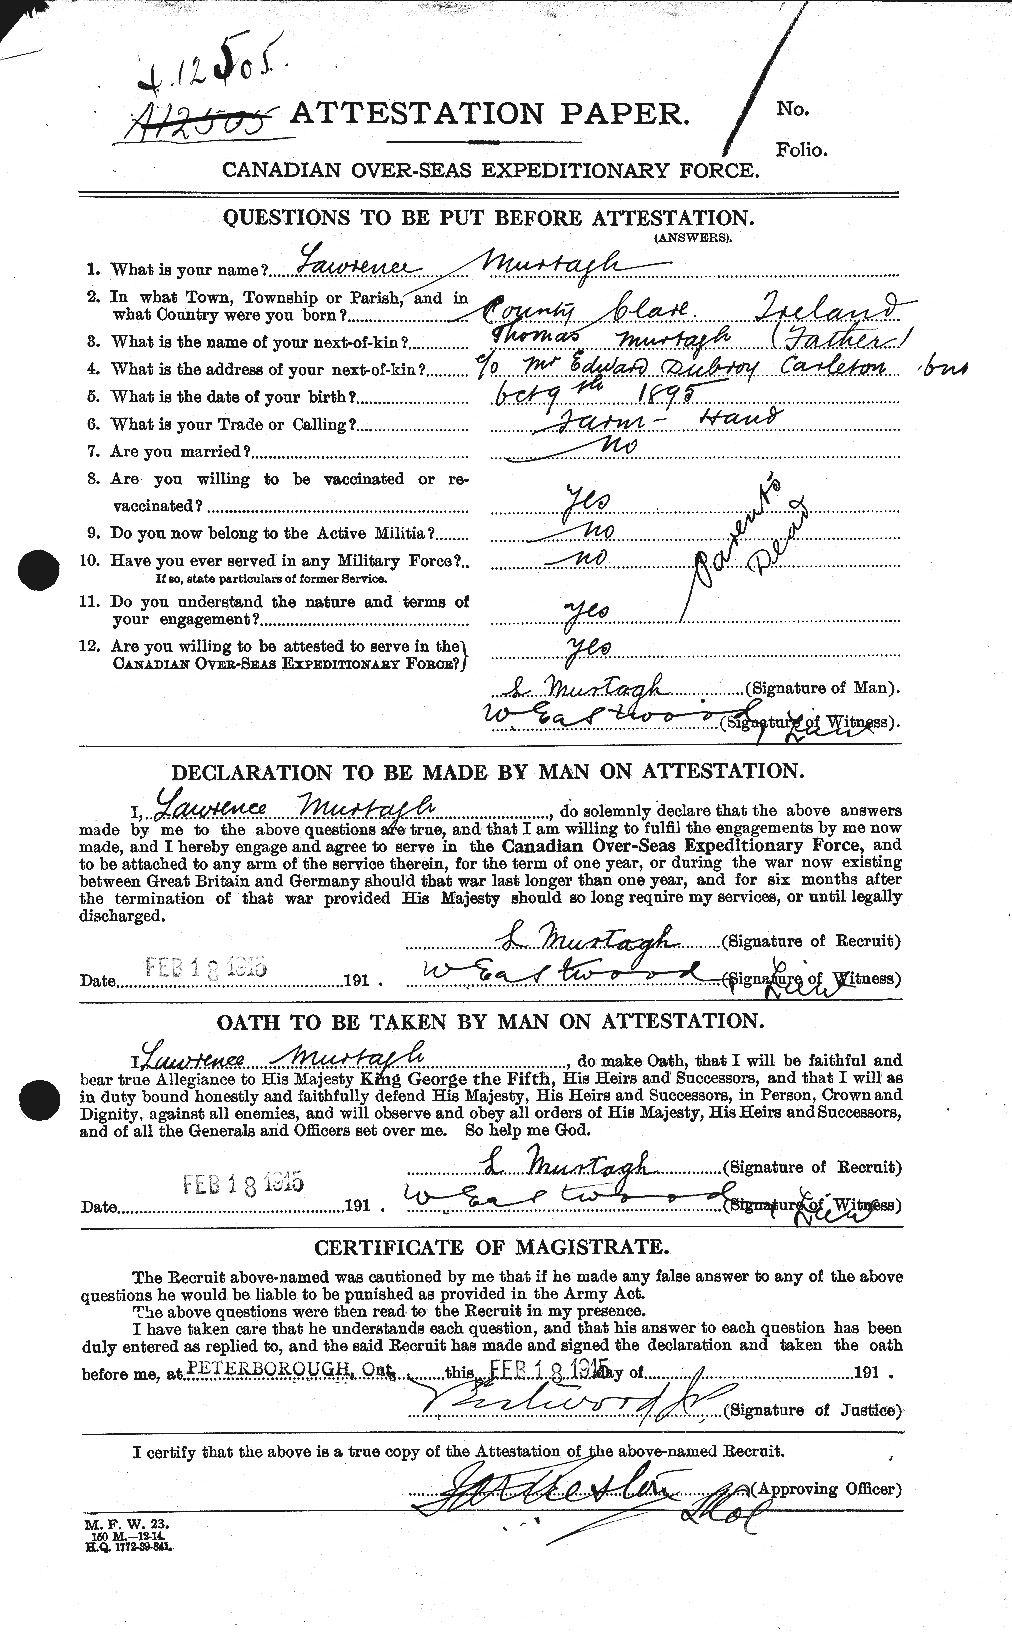 Personnel Records of the First World War - CEF 514869a